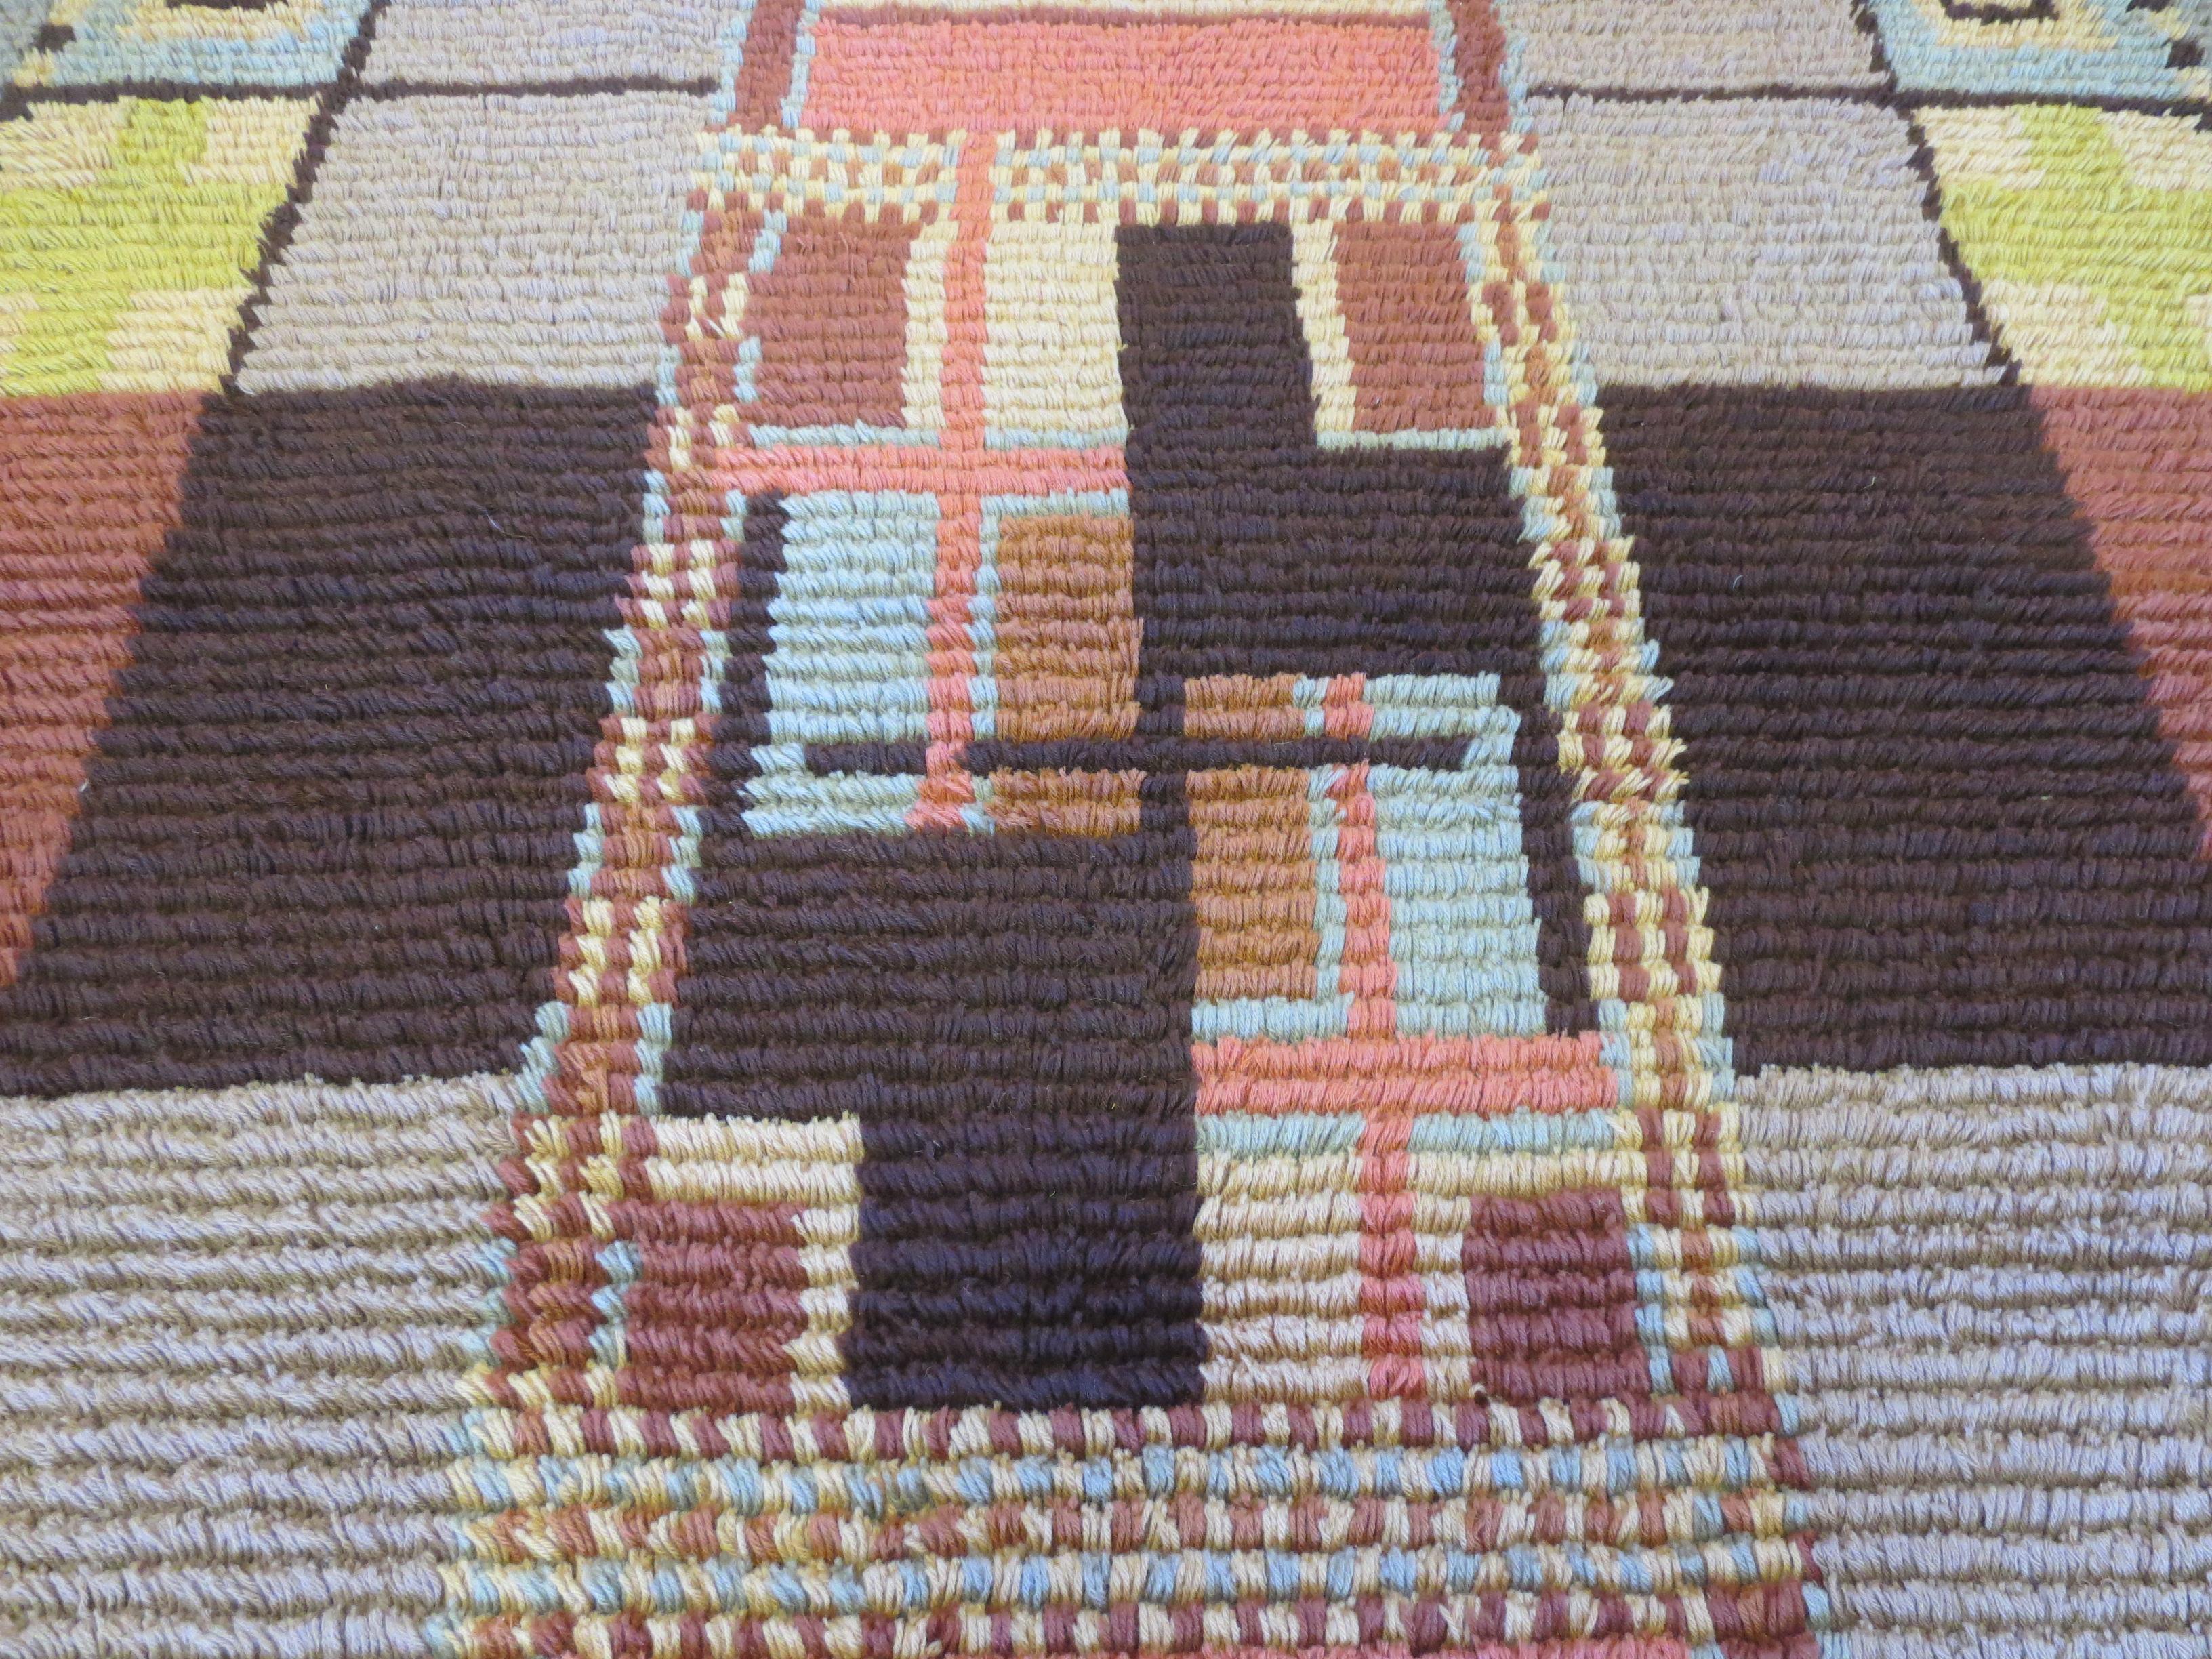 This is a vintage Scandinavian shag rug from the 1930s. It is truly a unique piece signed by the designer and dated 1931. It features skillfully arranged color blocks, with smaller compartments, and rectilinear figures. At its center, it invites the